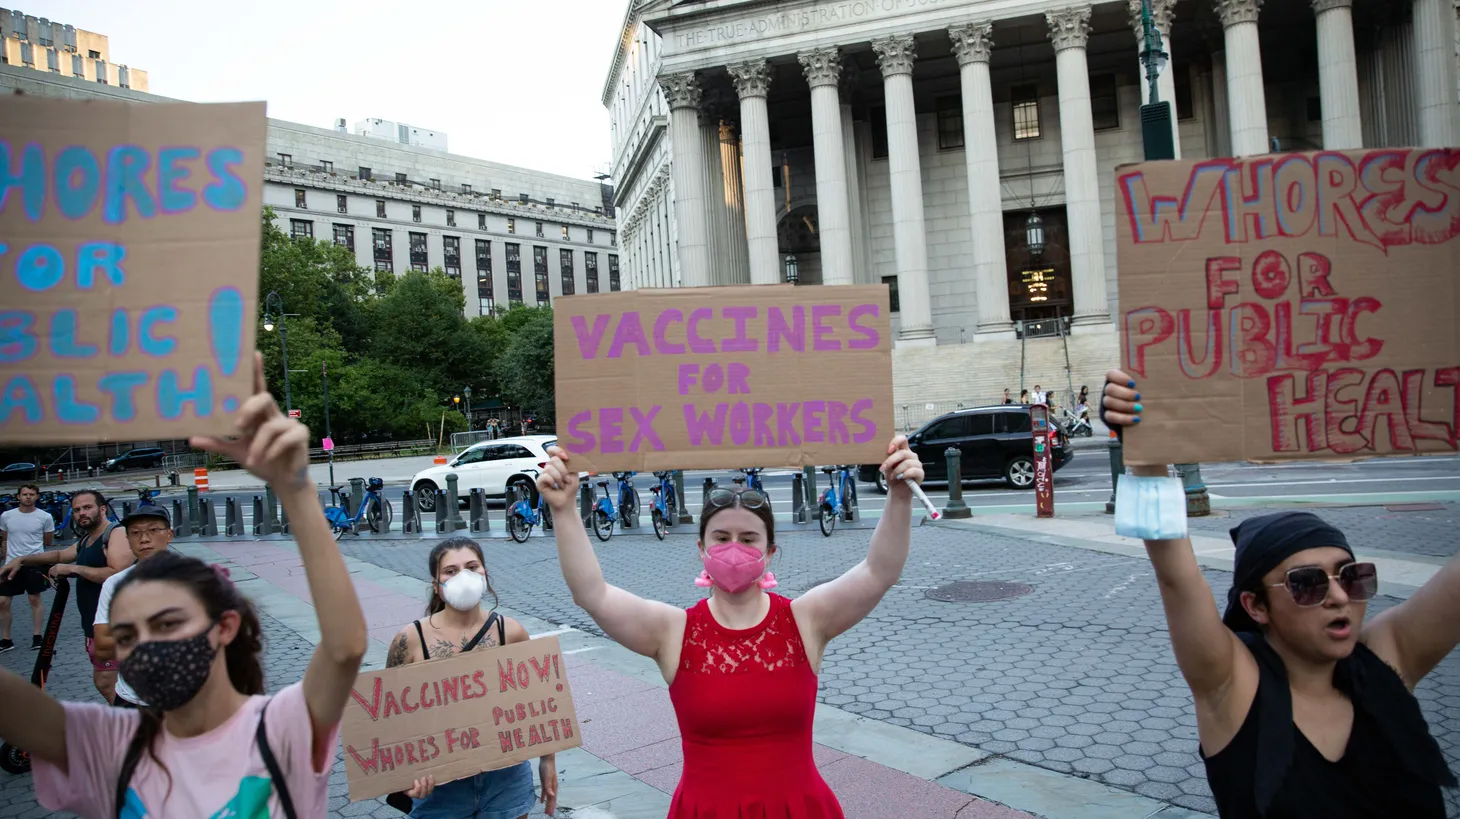 Activists hold signs that say “vaccines for sex workers” and “whores for public health,” at Foley Square in New York City, NY on July 21, 2022. They’re urging federal and state governments to take immediate action to make the monkeypox vaccine available for all those at risk, particularly the LGBTQ+ community and sex workers.